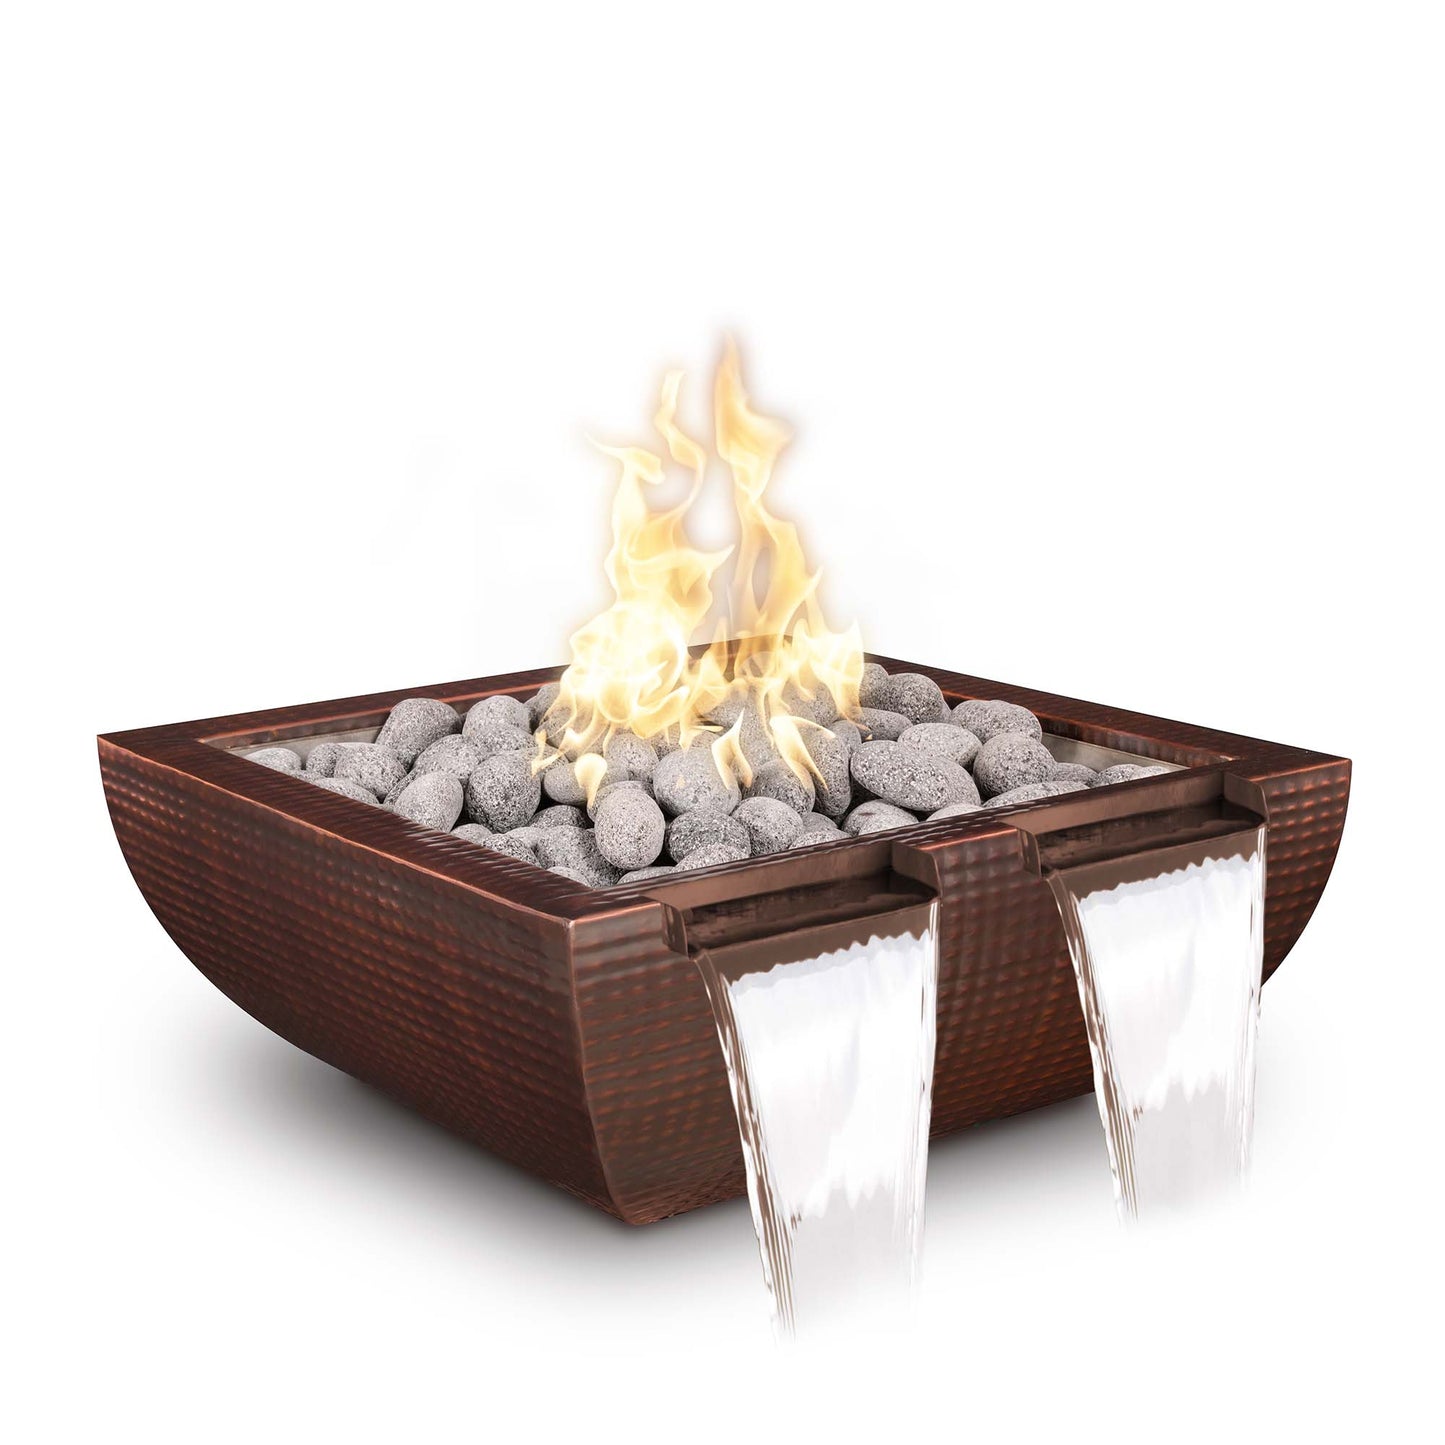 The Outdoor Plus Avalon Twin Spill 24" Pewter Powder Coated Metal Natural Gas Fire & Water Bowl with Match Lit Ignition